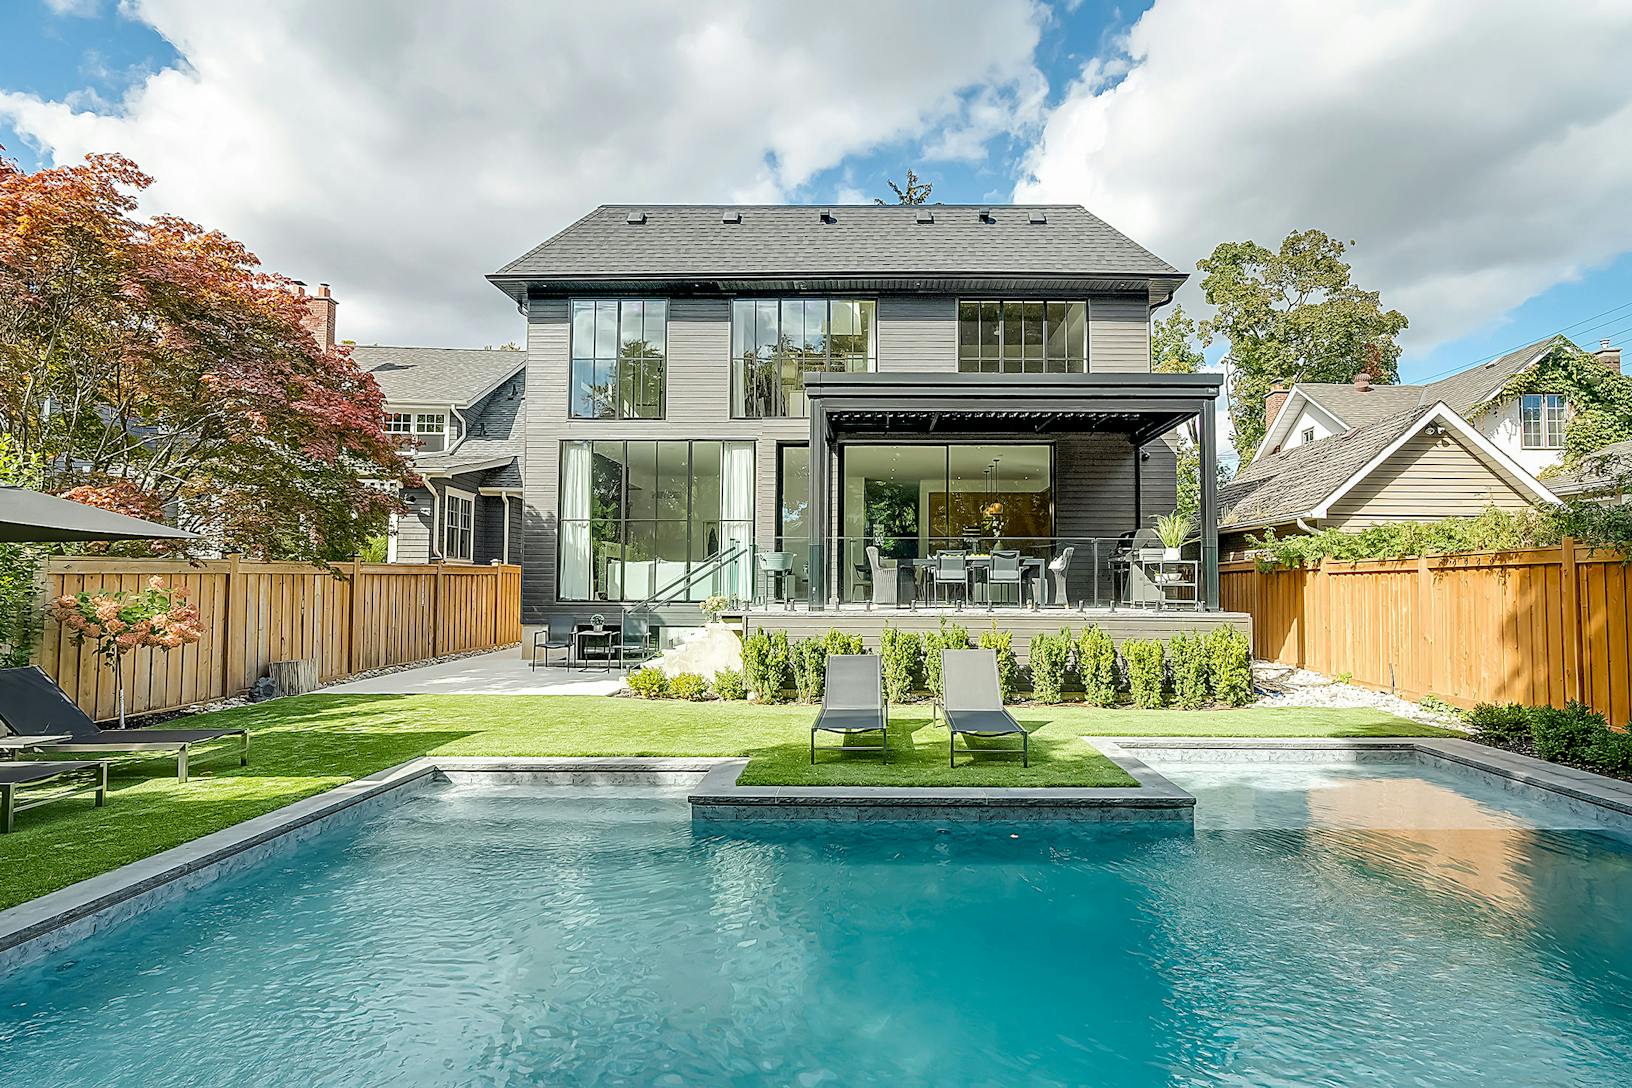 A modern home with a swimming pool in the backyard